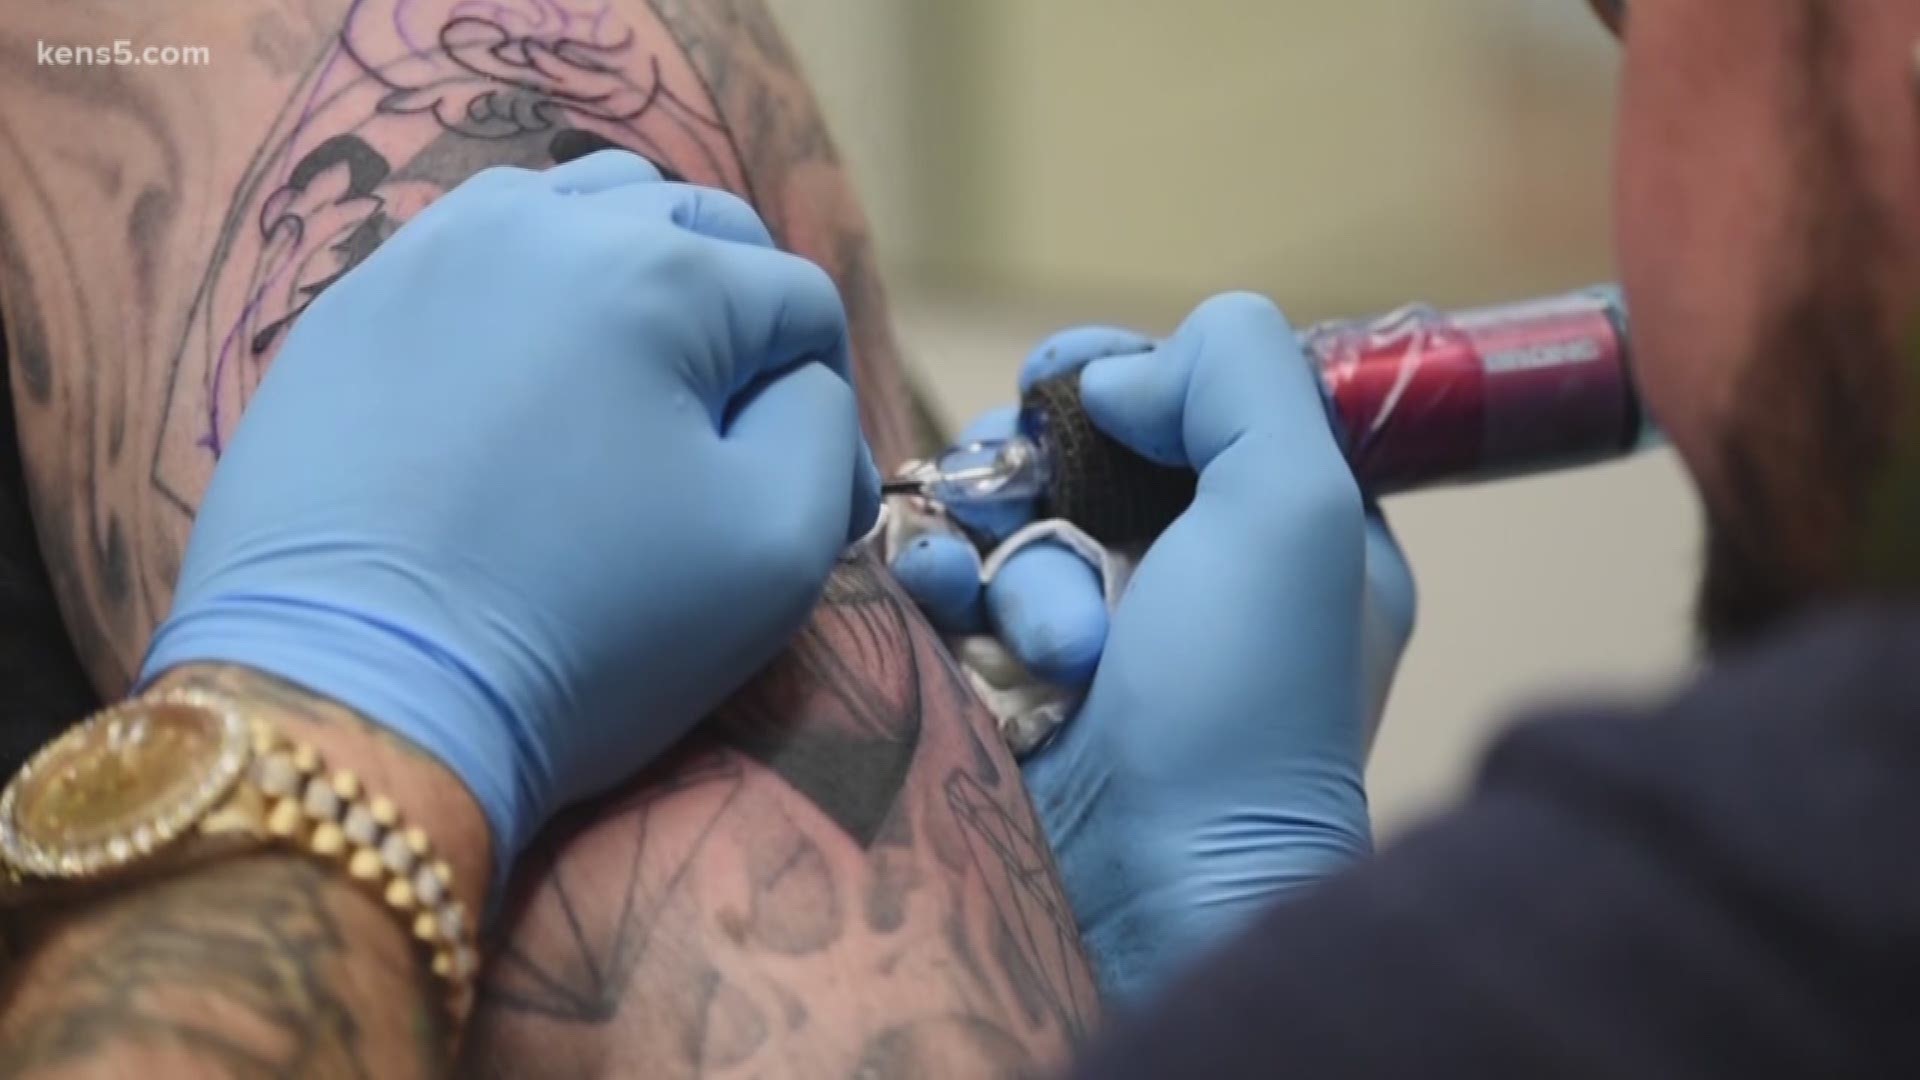 Tattoo artist is on a mission to erase hate in San Antonio